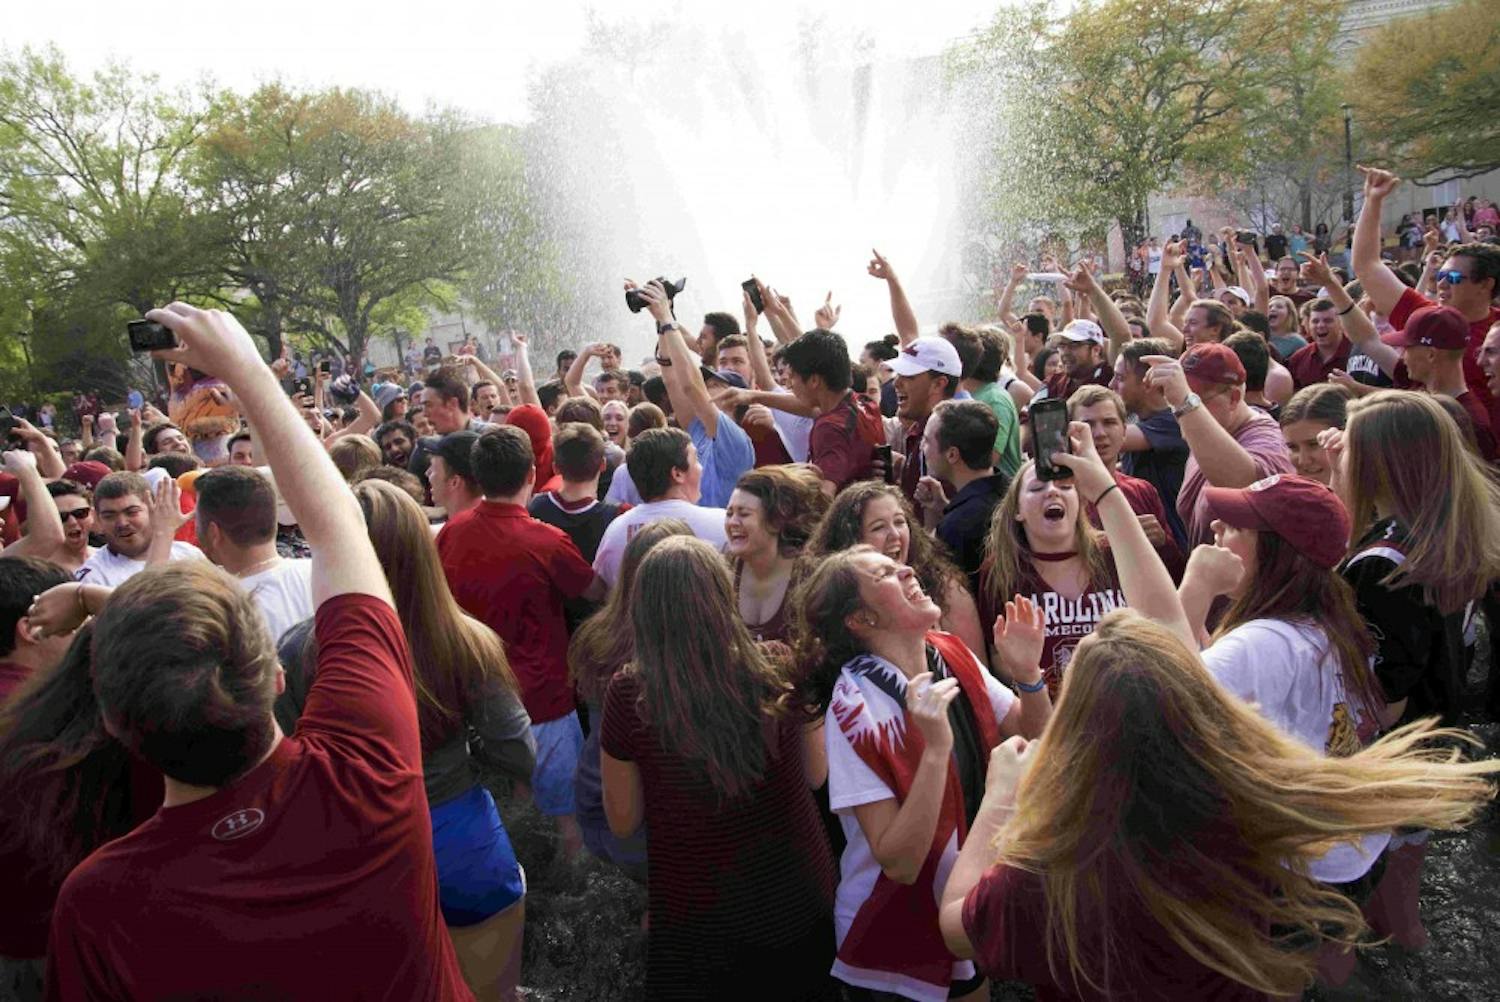 Students jump in the fountain to celebrate the Gamecocks men’s basketball team beating Florida in the Elite Eight and securing its place in the Final Four in 2017.